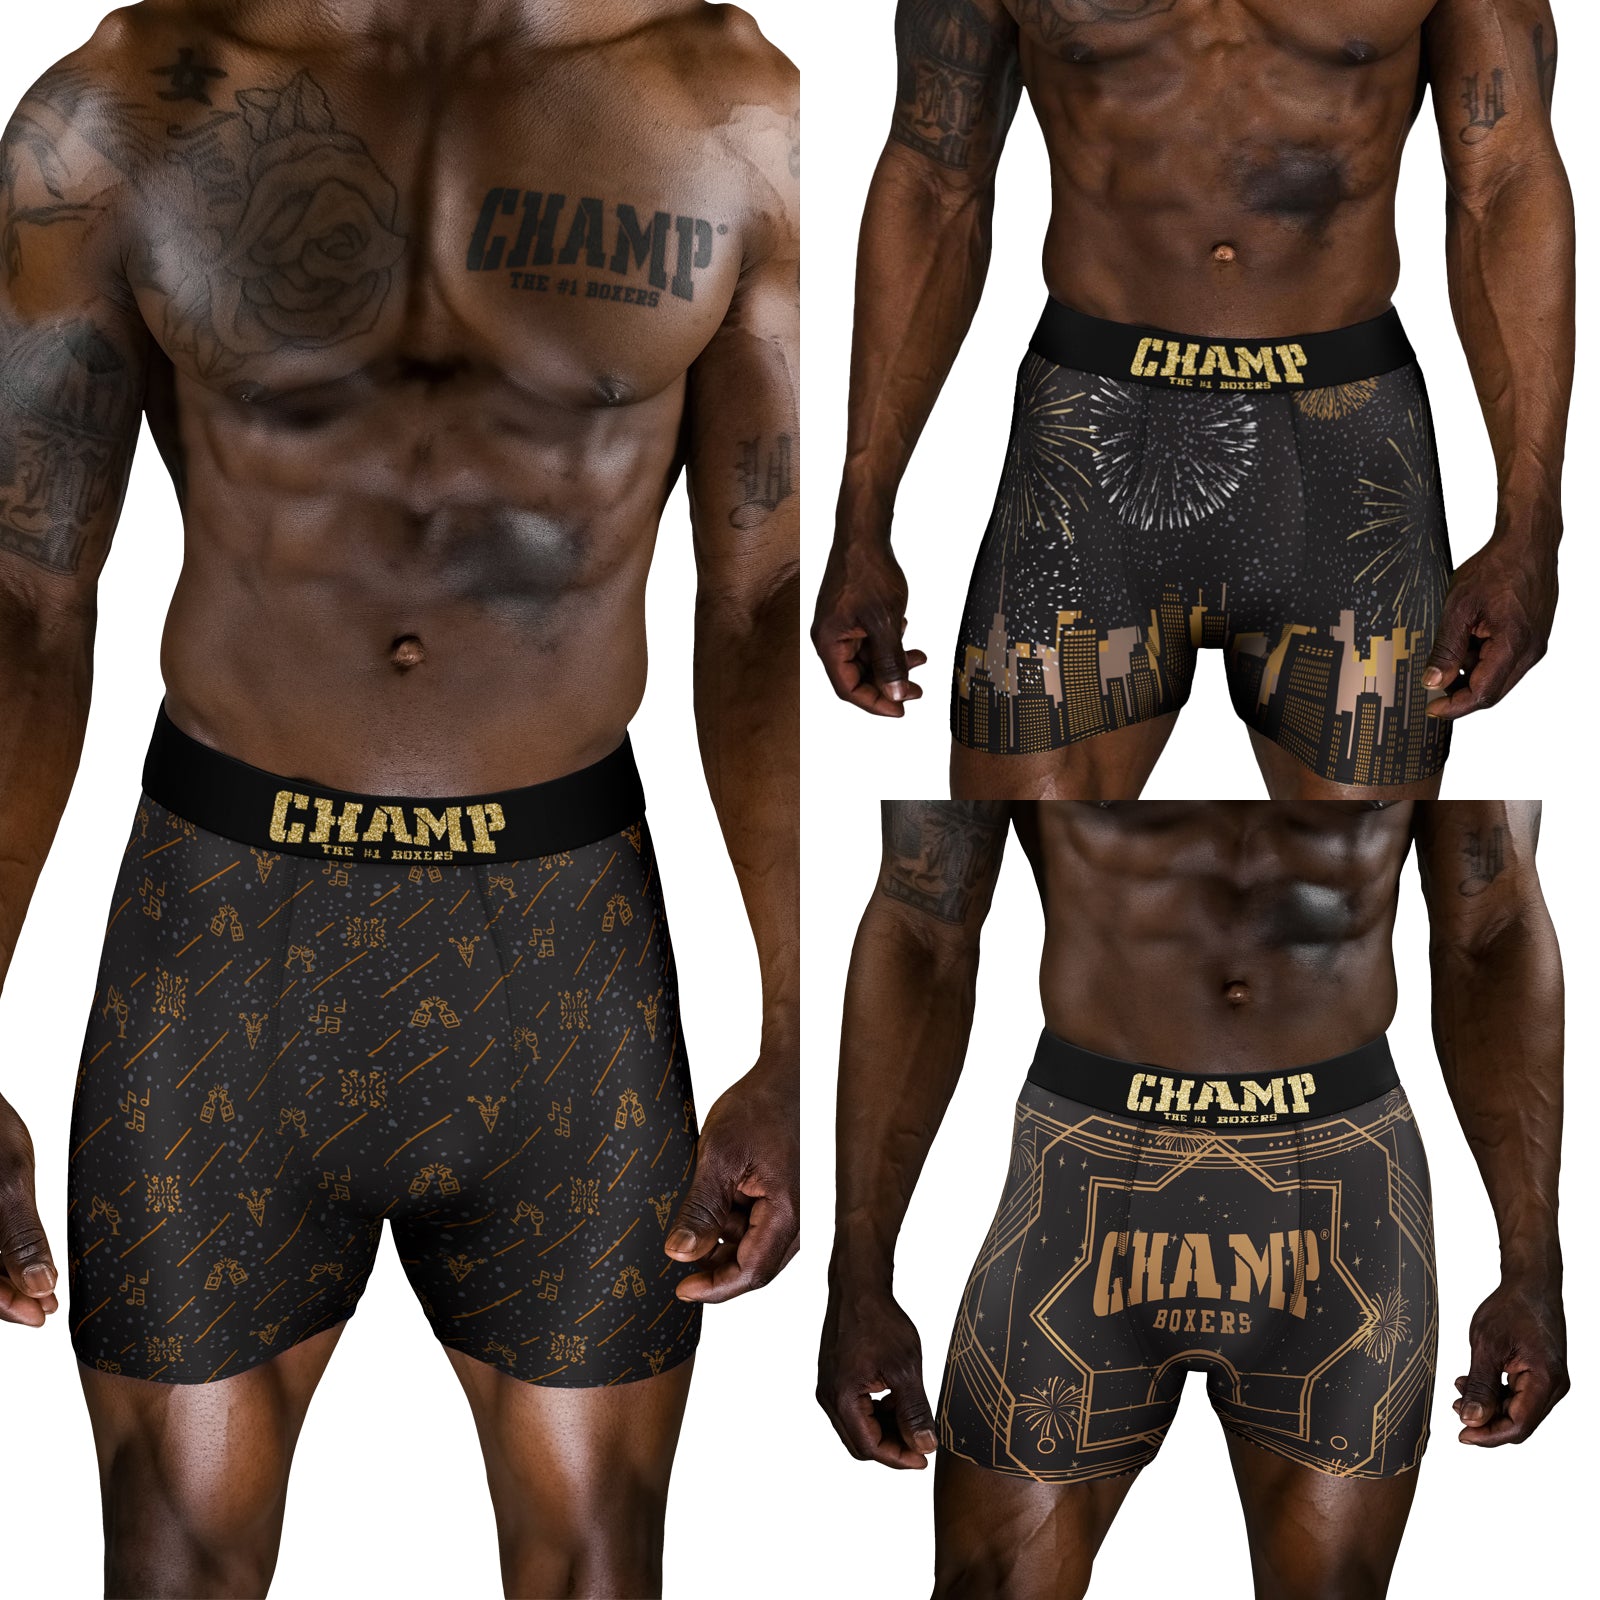 New Years Eve Edition (NO FLY) – Champ The #1 Boxers